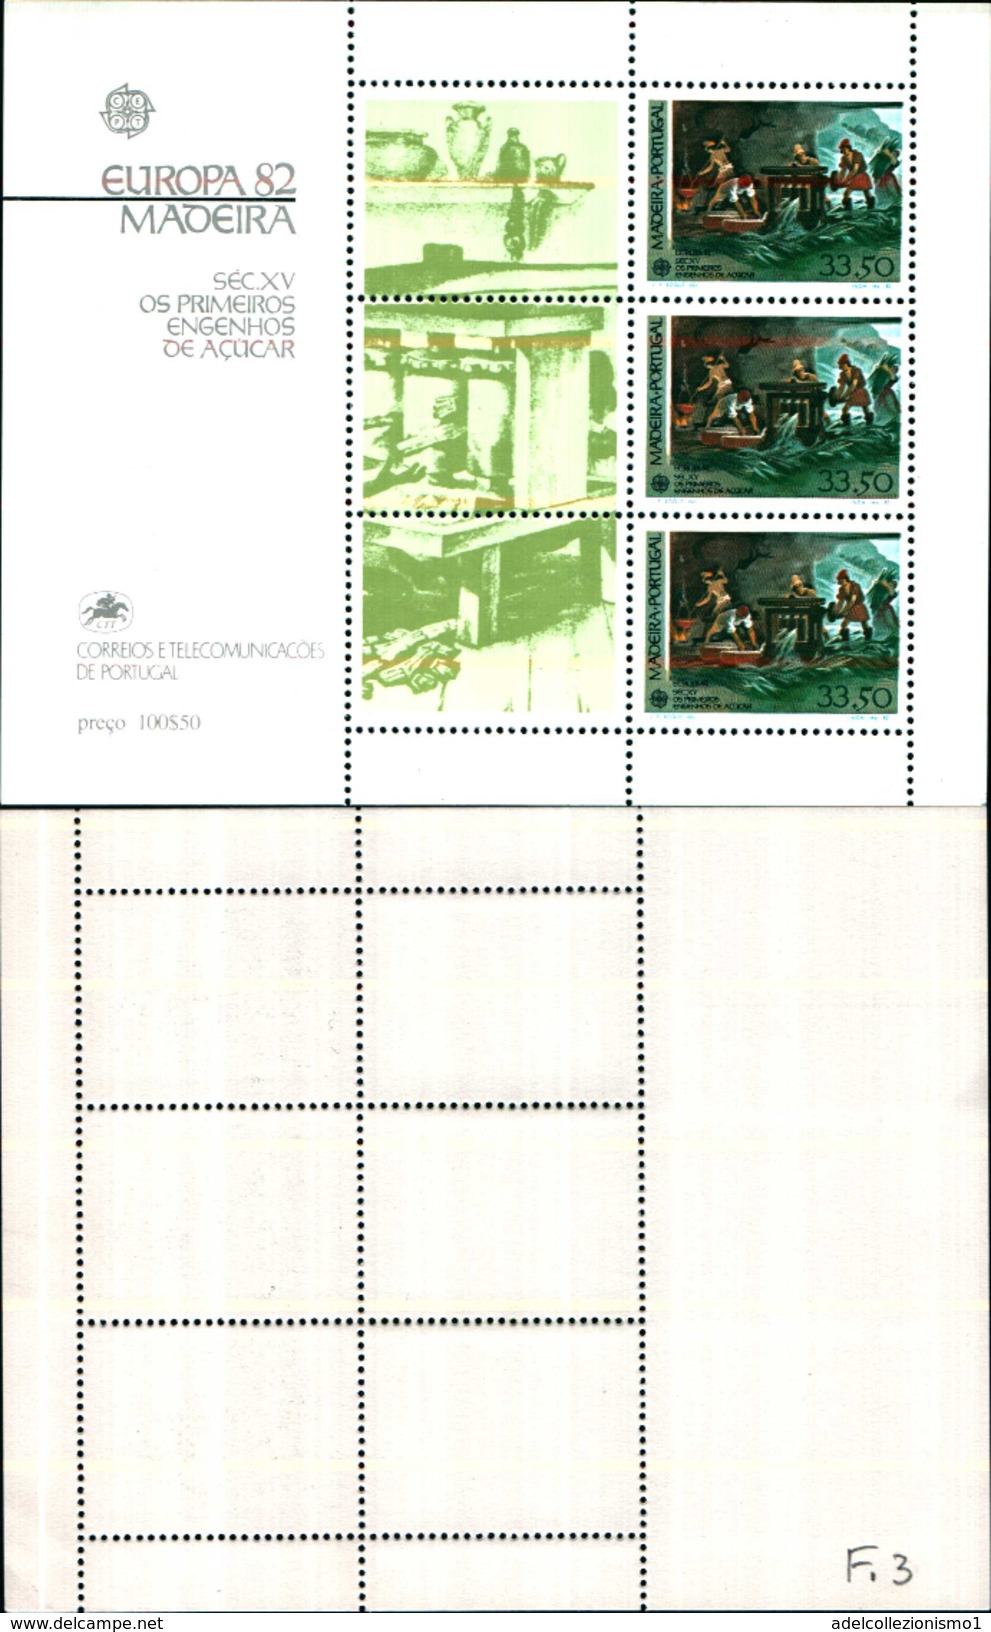 86805) TIMBRES STAMP BLOC FEUILLET EUROPA 82 MADEIRA MADERE PORTUGAL 1982 - Fogli Completi